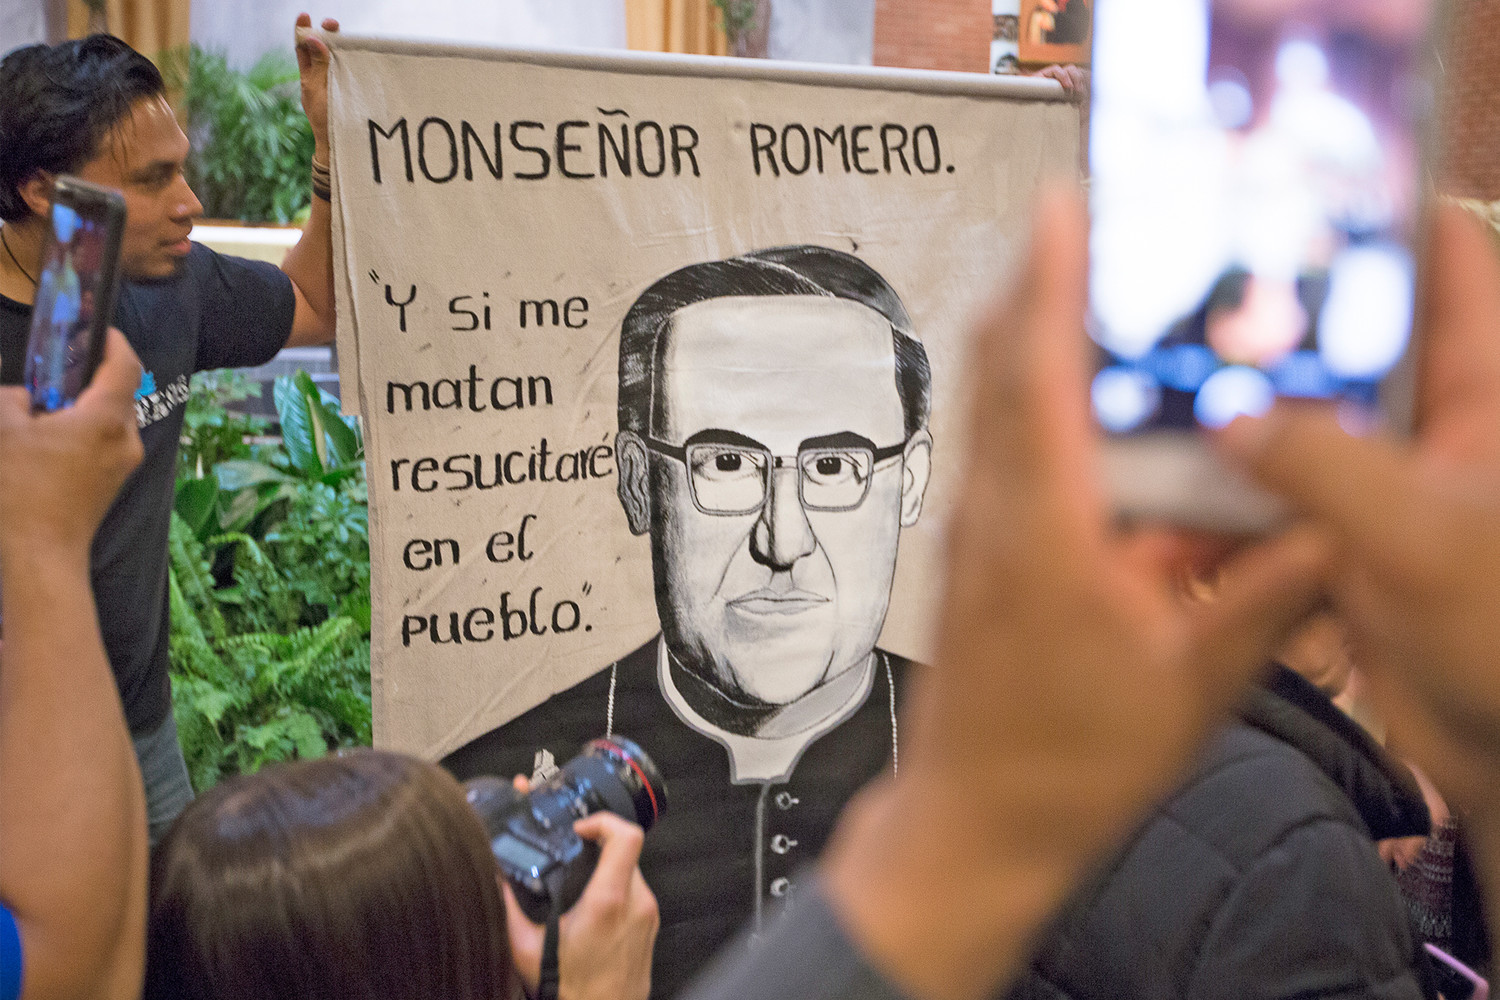 People take sellfies of an image of Blessed Oscar Romero April 10 at St. Camillus Church in Silver Spring, Maryland. During an April 11 homily in Washington, Salvadoran Archbishop Jose Luis Escobar Alas said the canonization of Blessed Romero will “probably” be in Rome and “probably” take place at end of October after a meeting of bishops.